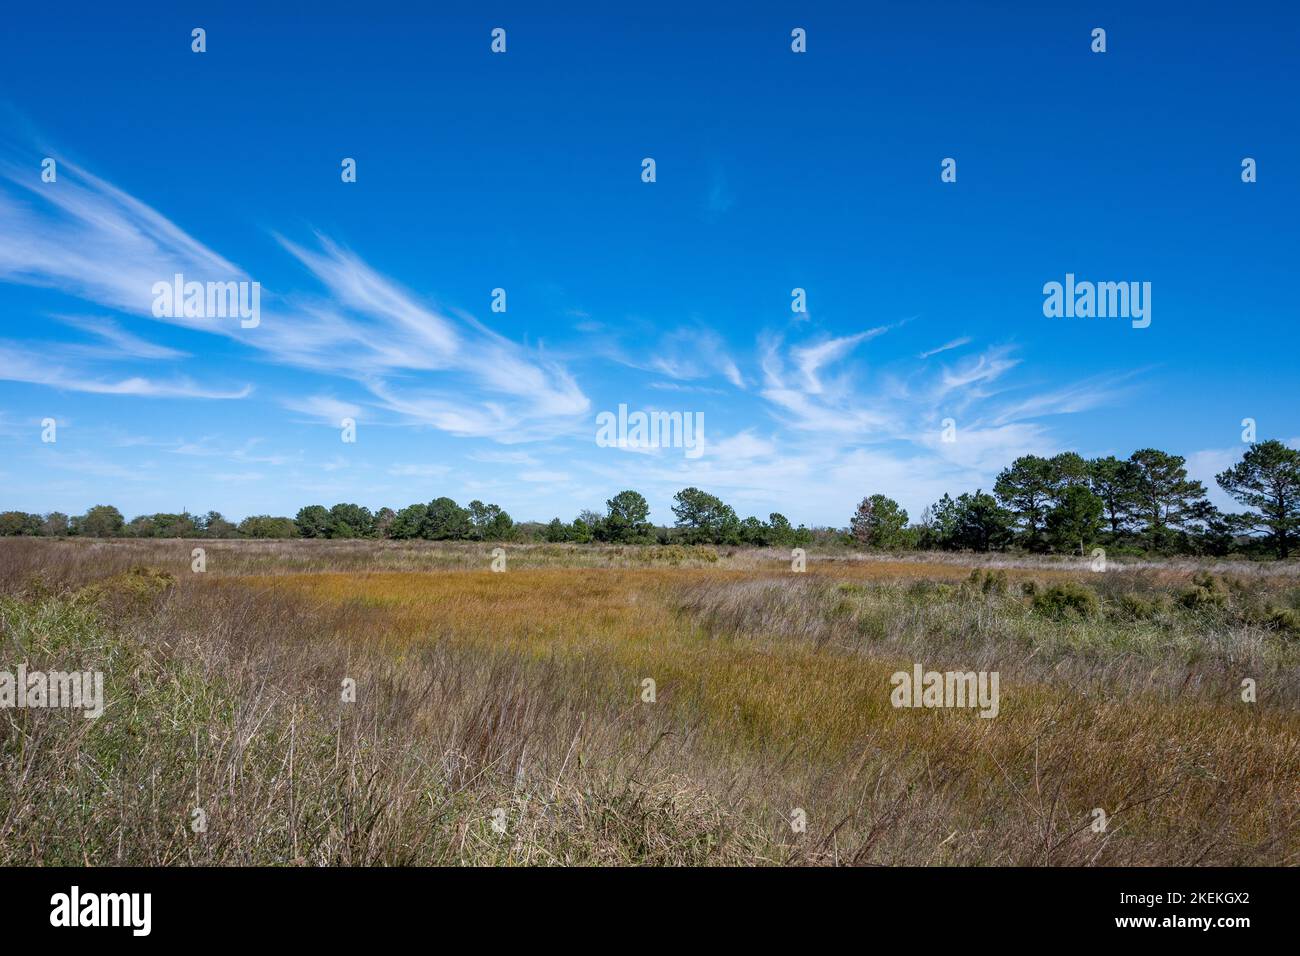 Wide open landscape of grassland at the Katy Prairie Conservancy Indiangrass Preserve. Houston, Texas, USA. Stock Photo